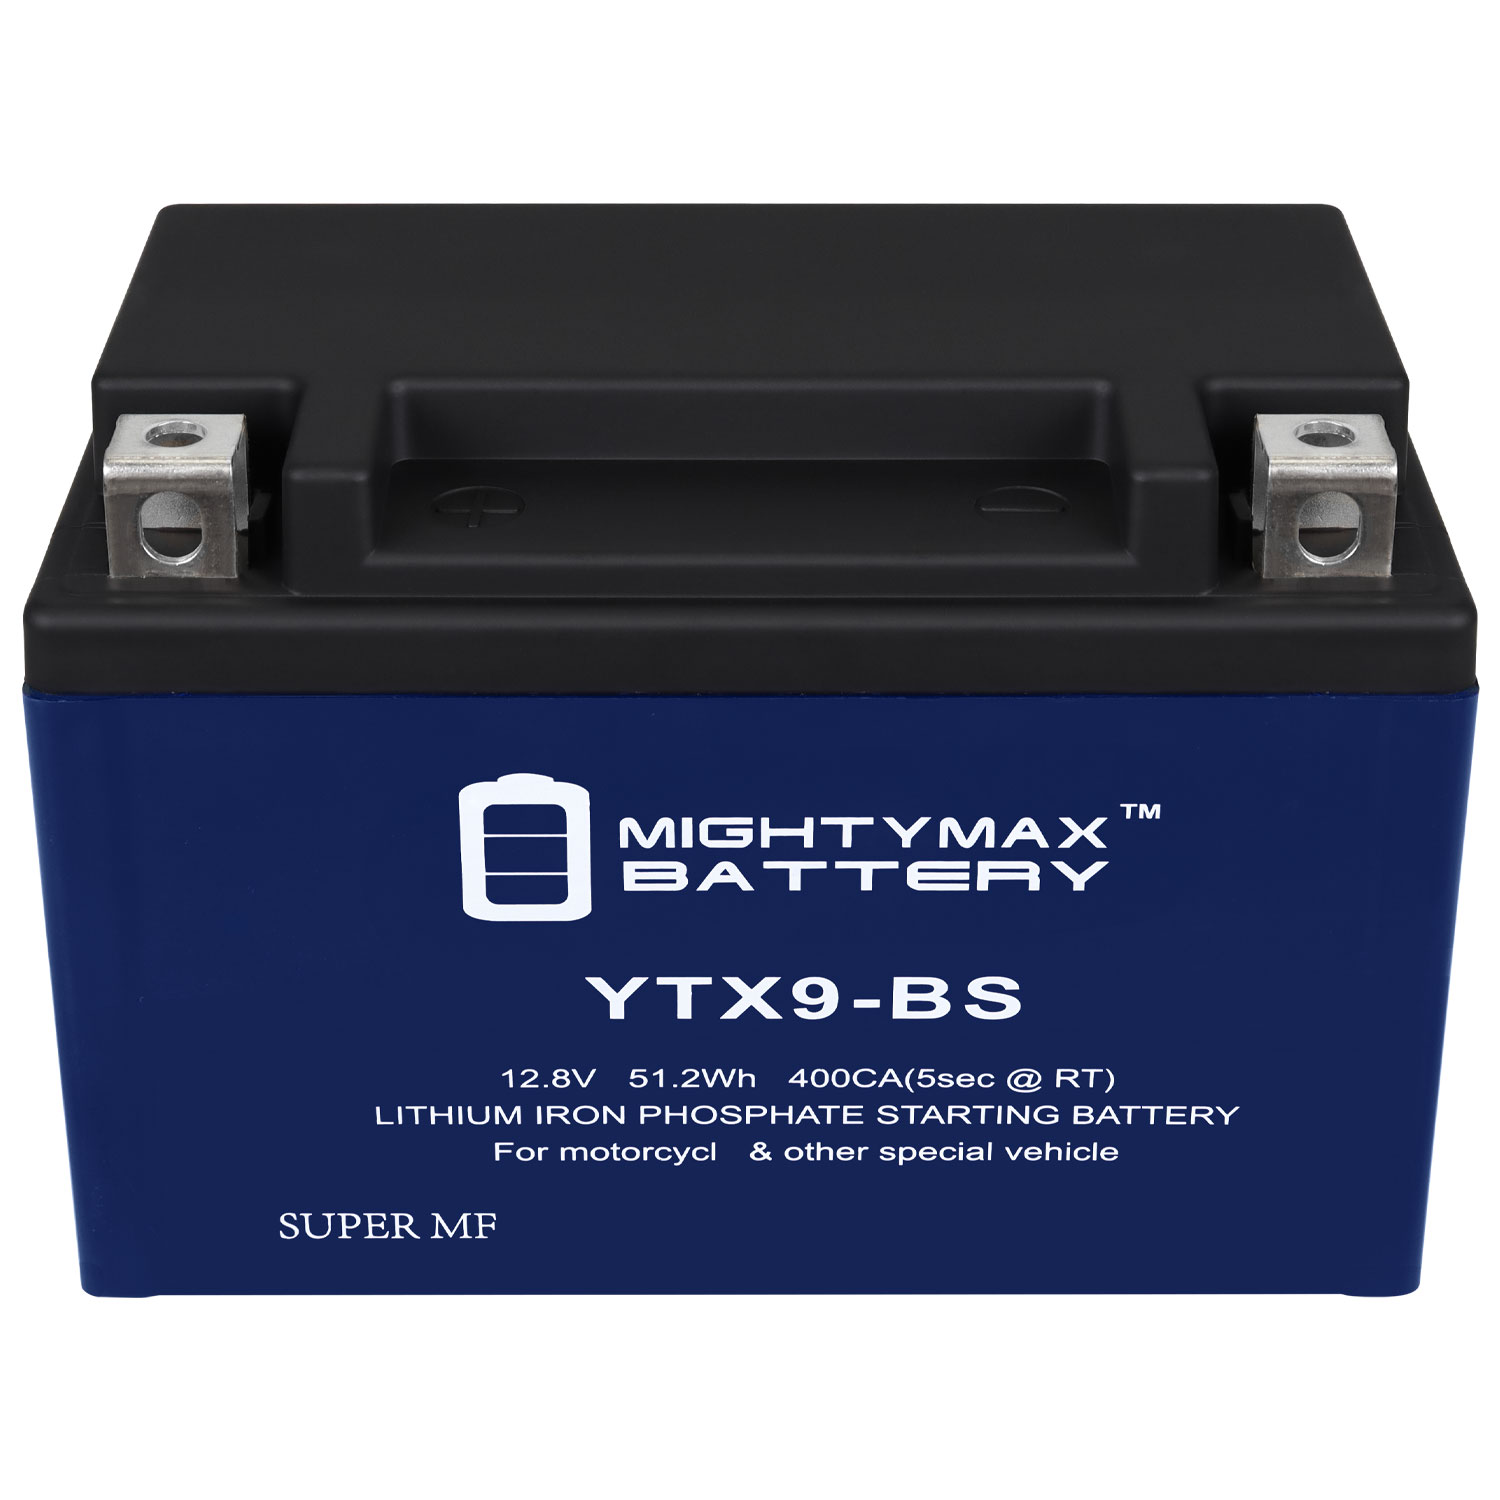 MIGHTY MAX BATTERY 12-Volt 8Ah, 300 CCA, Lithium Iron Phosphate (LiFePO4)  Battery YTX9-BSLIFEPO4 - The Home Depot